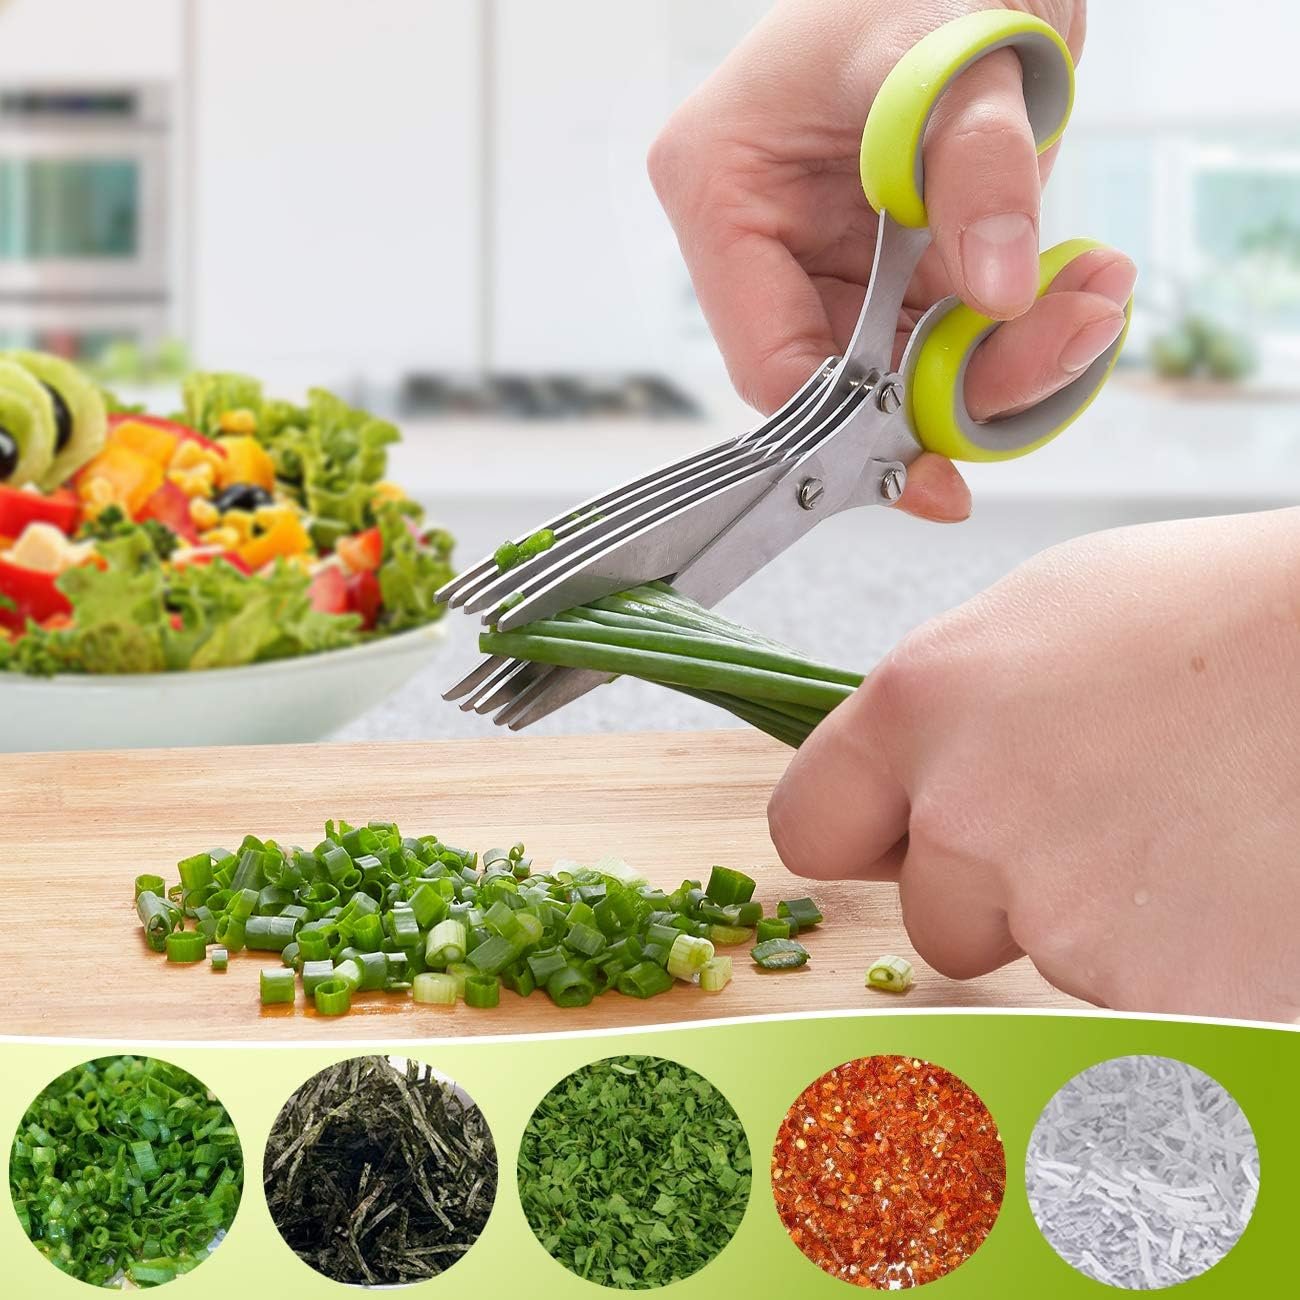 LHS Herb Scissors with 5 Multi Stainless Steel Blades and Safe Cover Kitchen Gadgets Cutter, Kitchen Chopping Shear, Mincer, Sharp Dishwasher Safe Kitchen Gadget, Culinary Cutter : Patio, Lawn  Garden